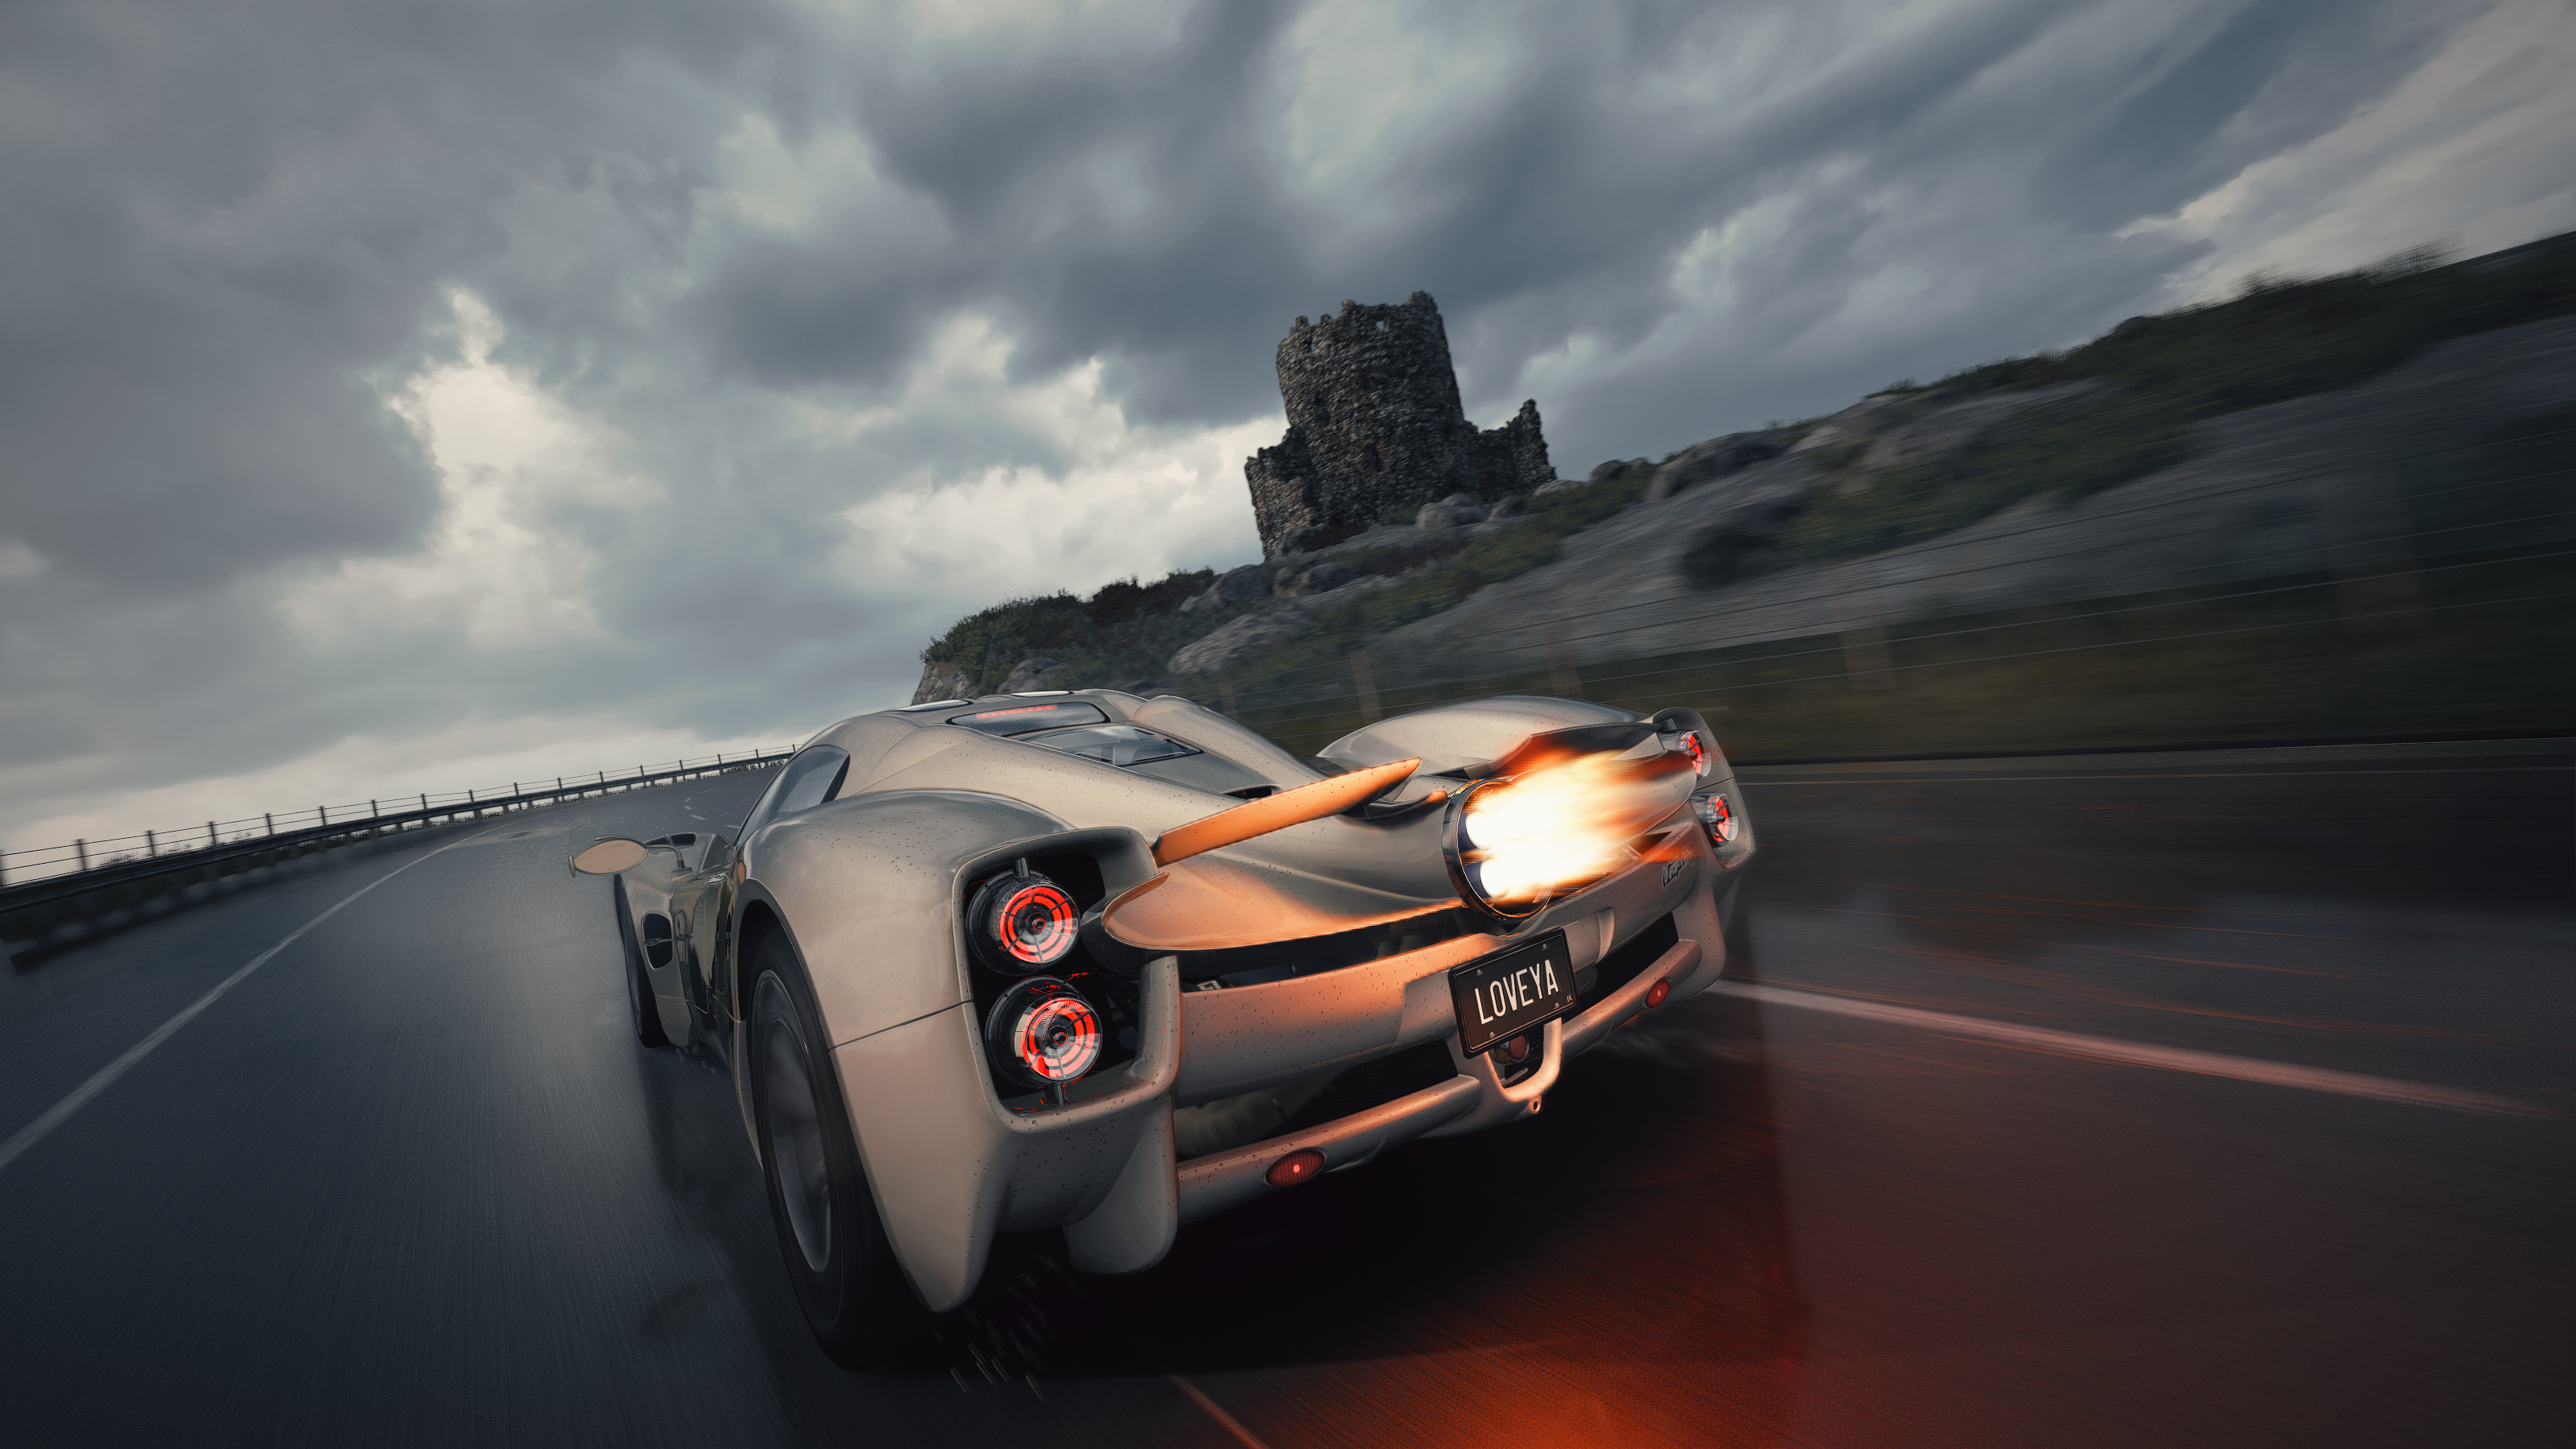 General 3200x1800 Pagani Pagani utopia Assetto Corsa 4K gaming Scottish Highlands white rear view video game art driving exaust flare video games screen shot clouds licence plates motion blur blurred reflection car sky